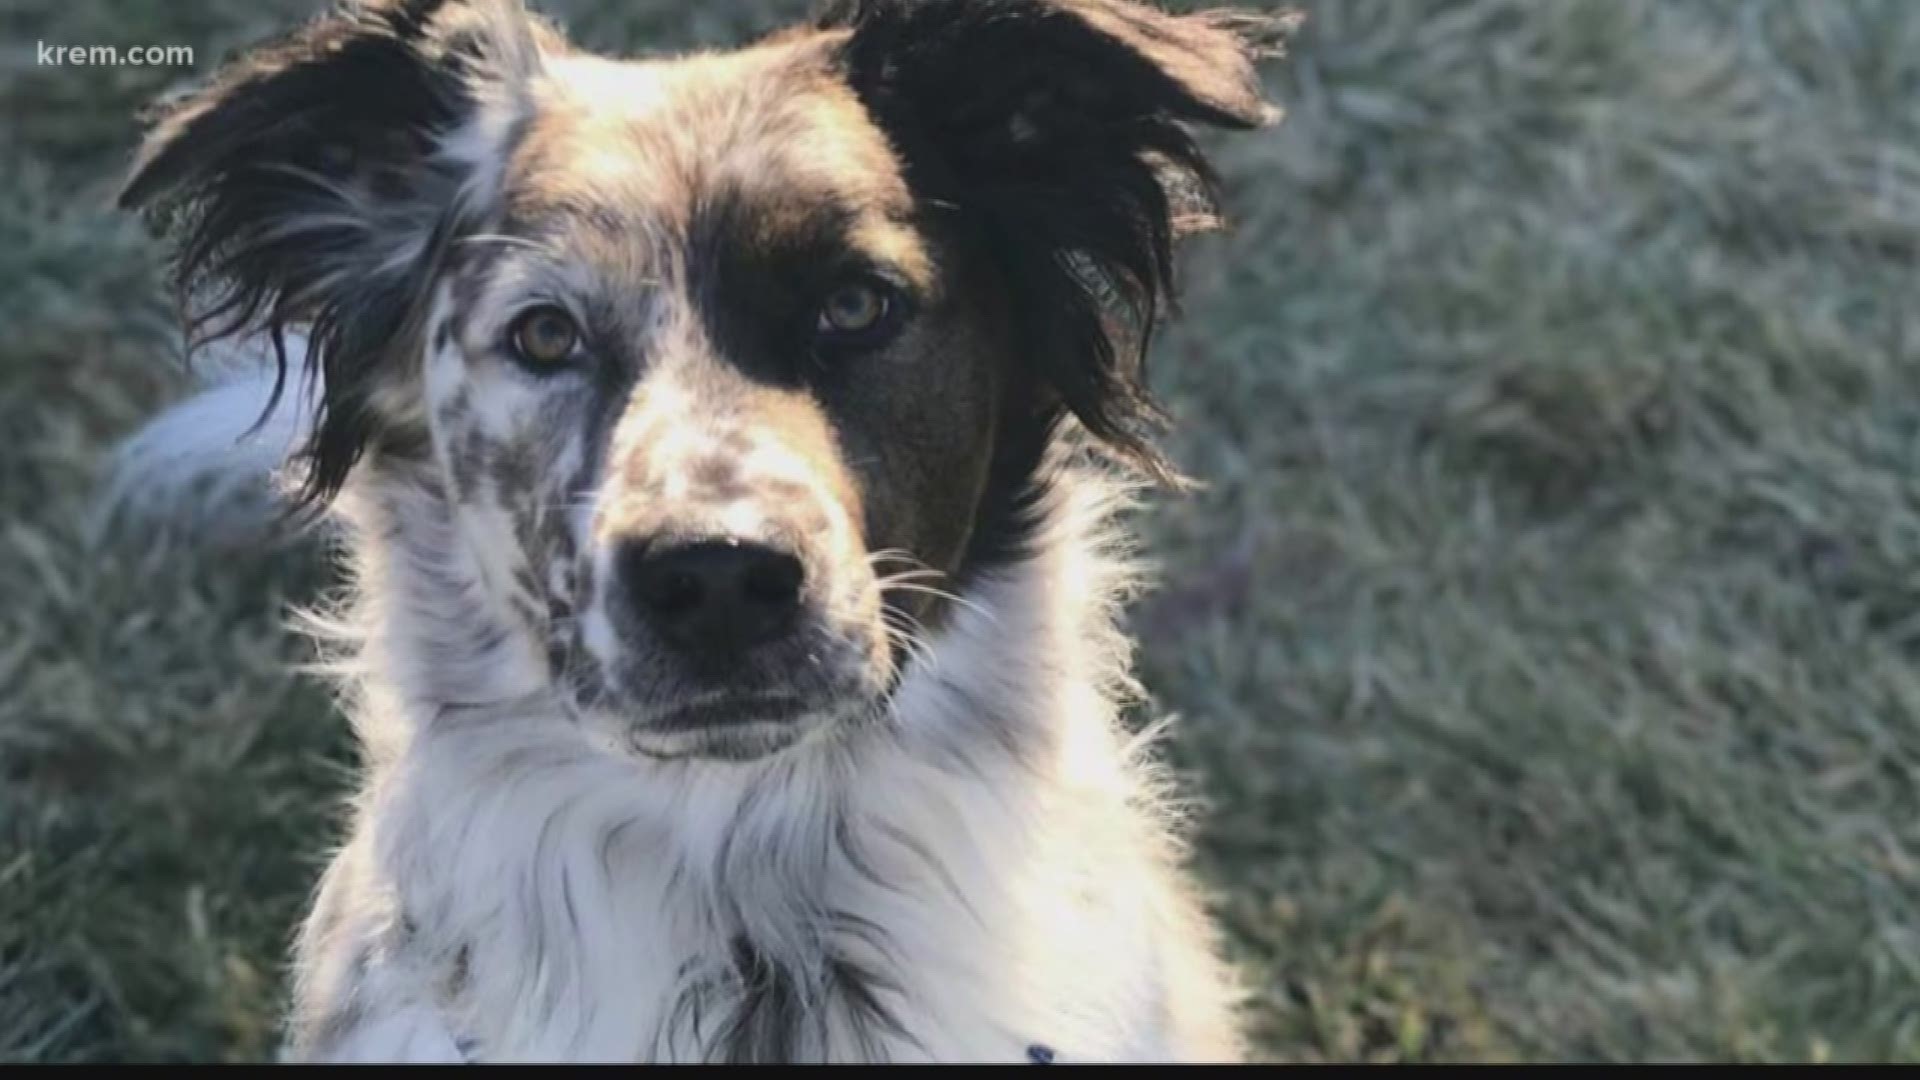 A Spokane man's dog was likely killed by electrocution due to a break in the insulation of a 45-year-old heated sidewalk system, an investigation found.